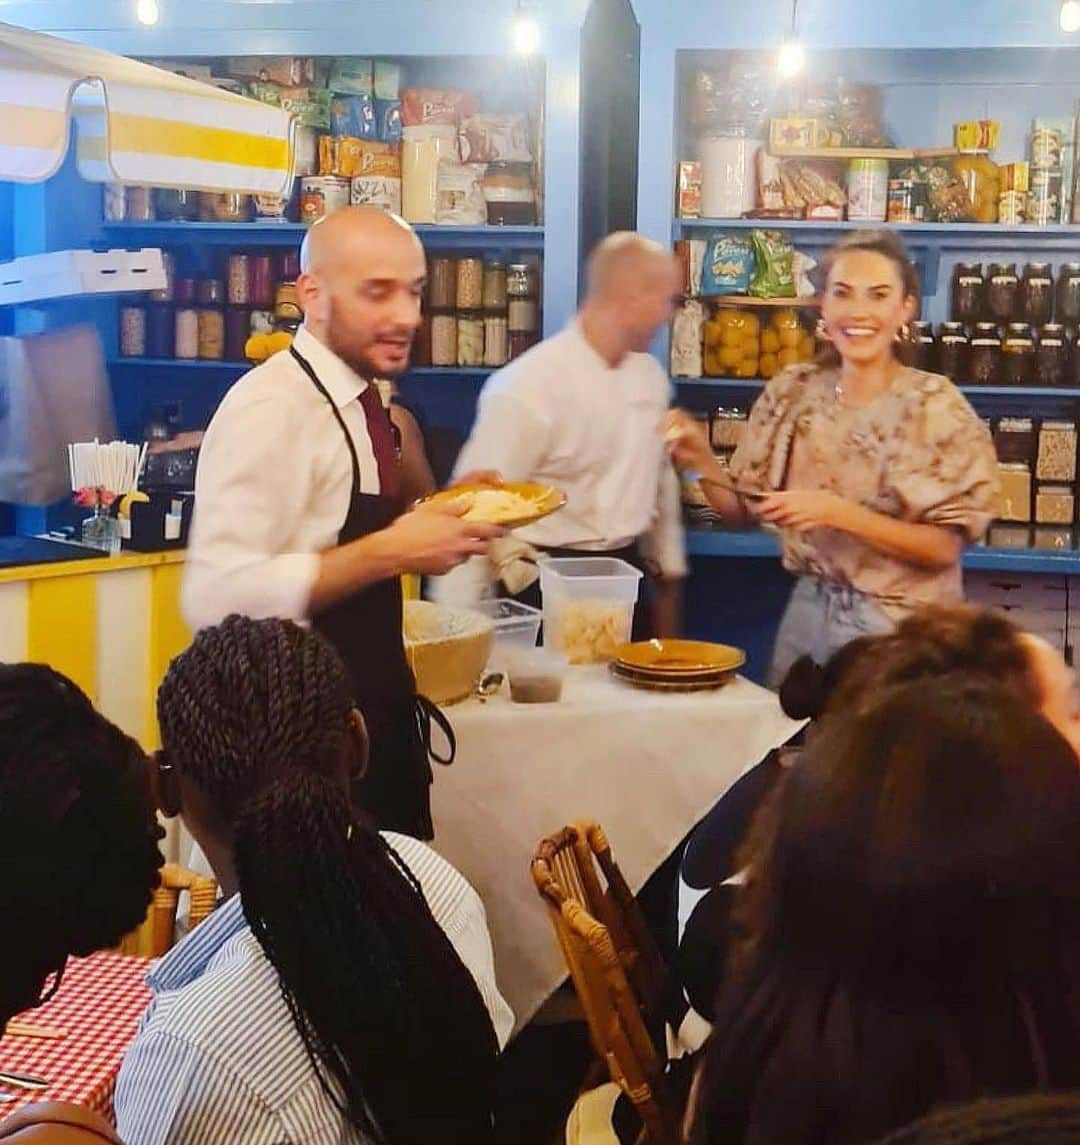 Elizabeth Chambers Hammerのインスタグラム：「Blurry, but HAPPY! Thank you, chef @jaketylerbrodsky, @spadadavide88 and @paradisepizzagc for inviting me to be in my absolute element. Guest cheffing/serving last night was everything. We made Cacio e Pepe, served tableside for hundreds of happy guests, and now they’re stuck with me. See you next week for another Mambo Italiano night (and maybe Sunday brunch and every @tillies, @paradisepizzagc and @palmheightsgc event in between). Here to serve! And cook.」